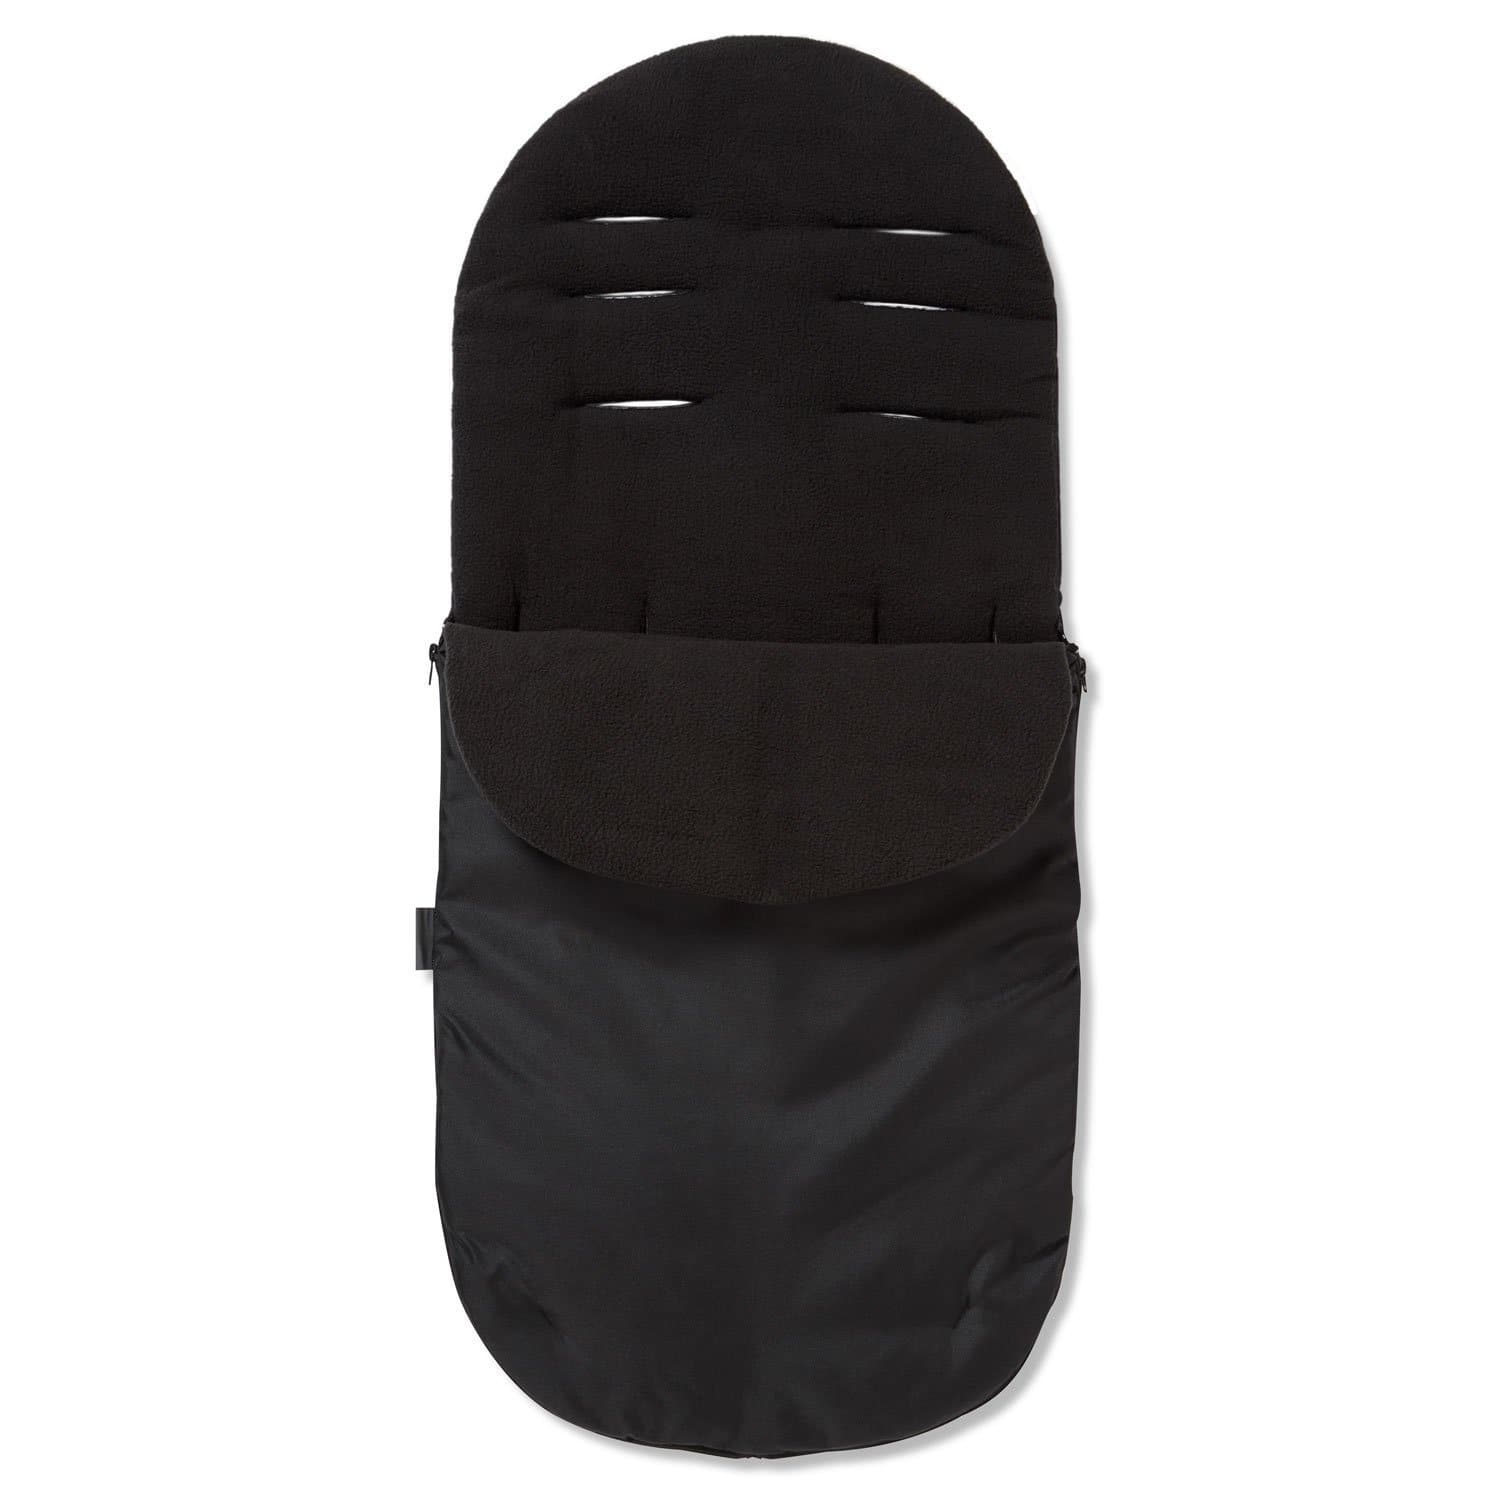 Footmuff / Cosy Toes Compatible with Hybrid - Black / Fits All Models | For Your Little One